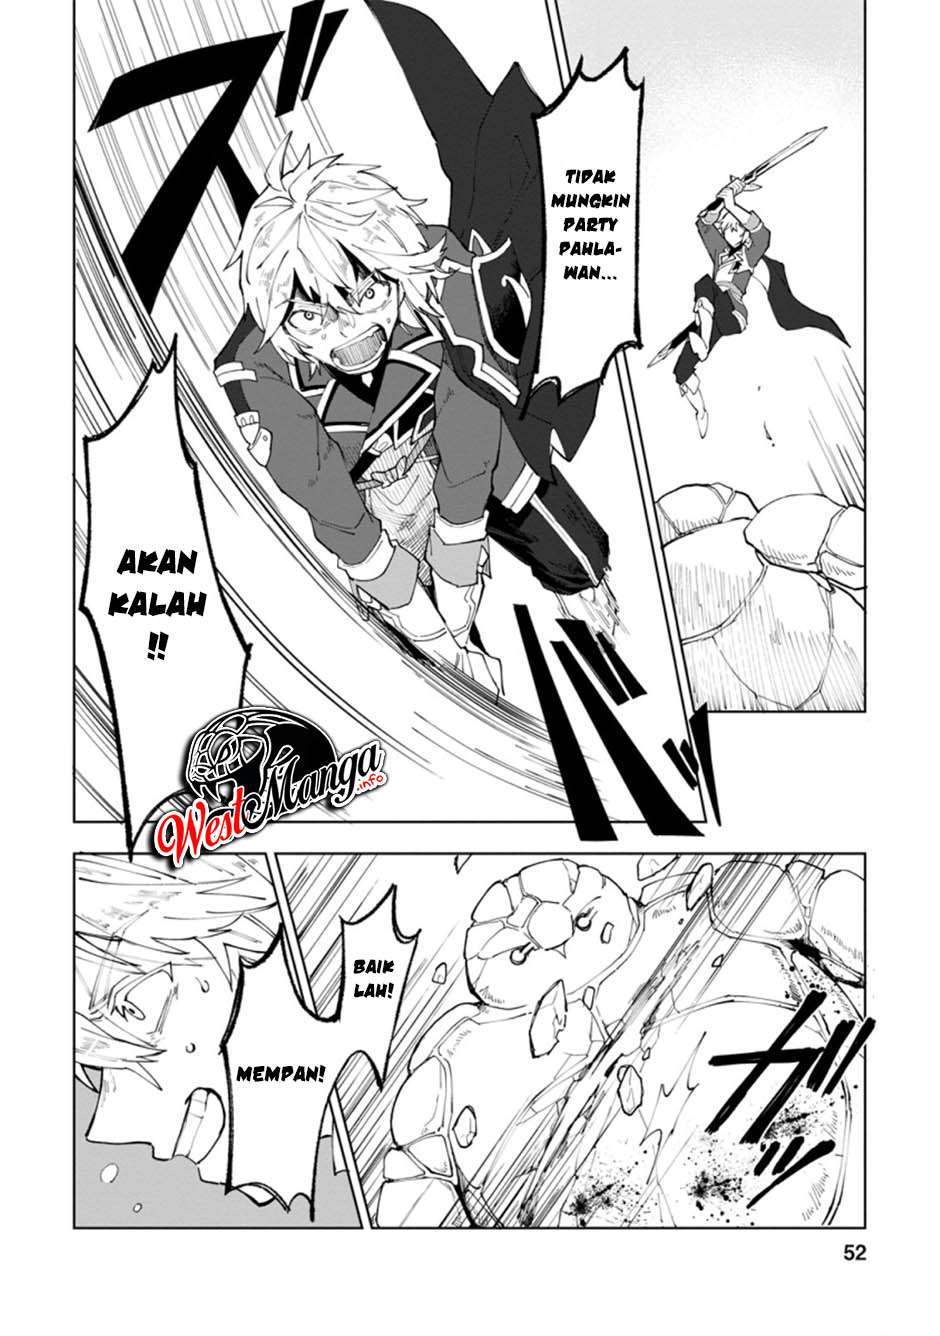 KomiknThe White Mage Who Was Banished From the Hero’s Party Is Picked up by an S Rank Adventurer ~ This White Mage Is Too Out of the Ordinary! Chapter 2